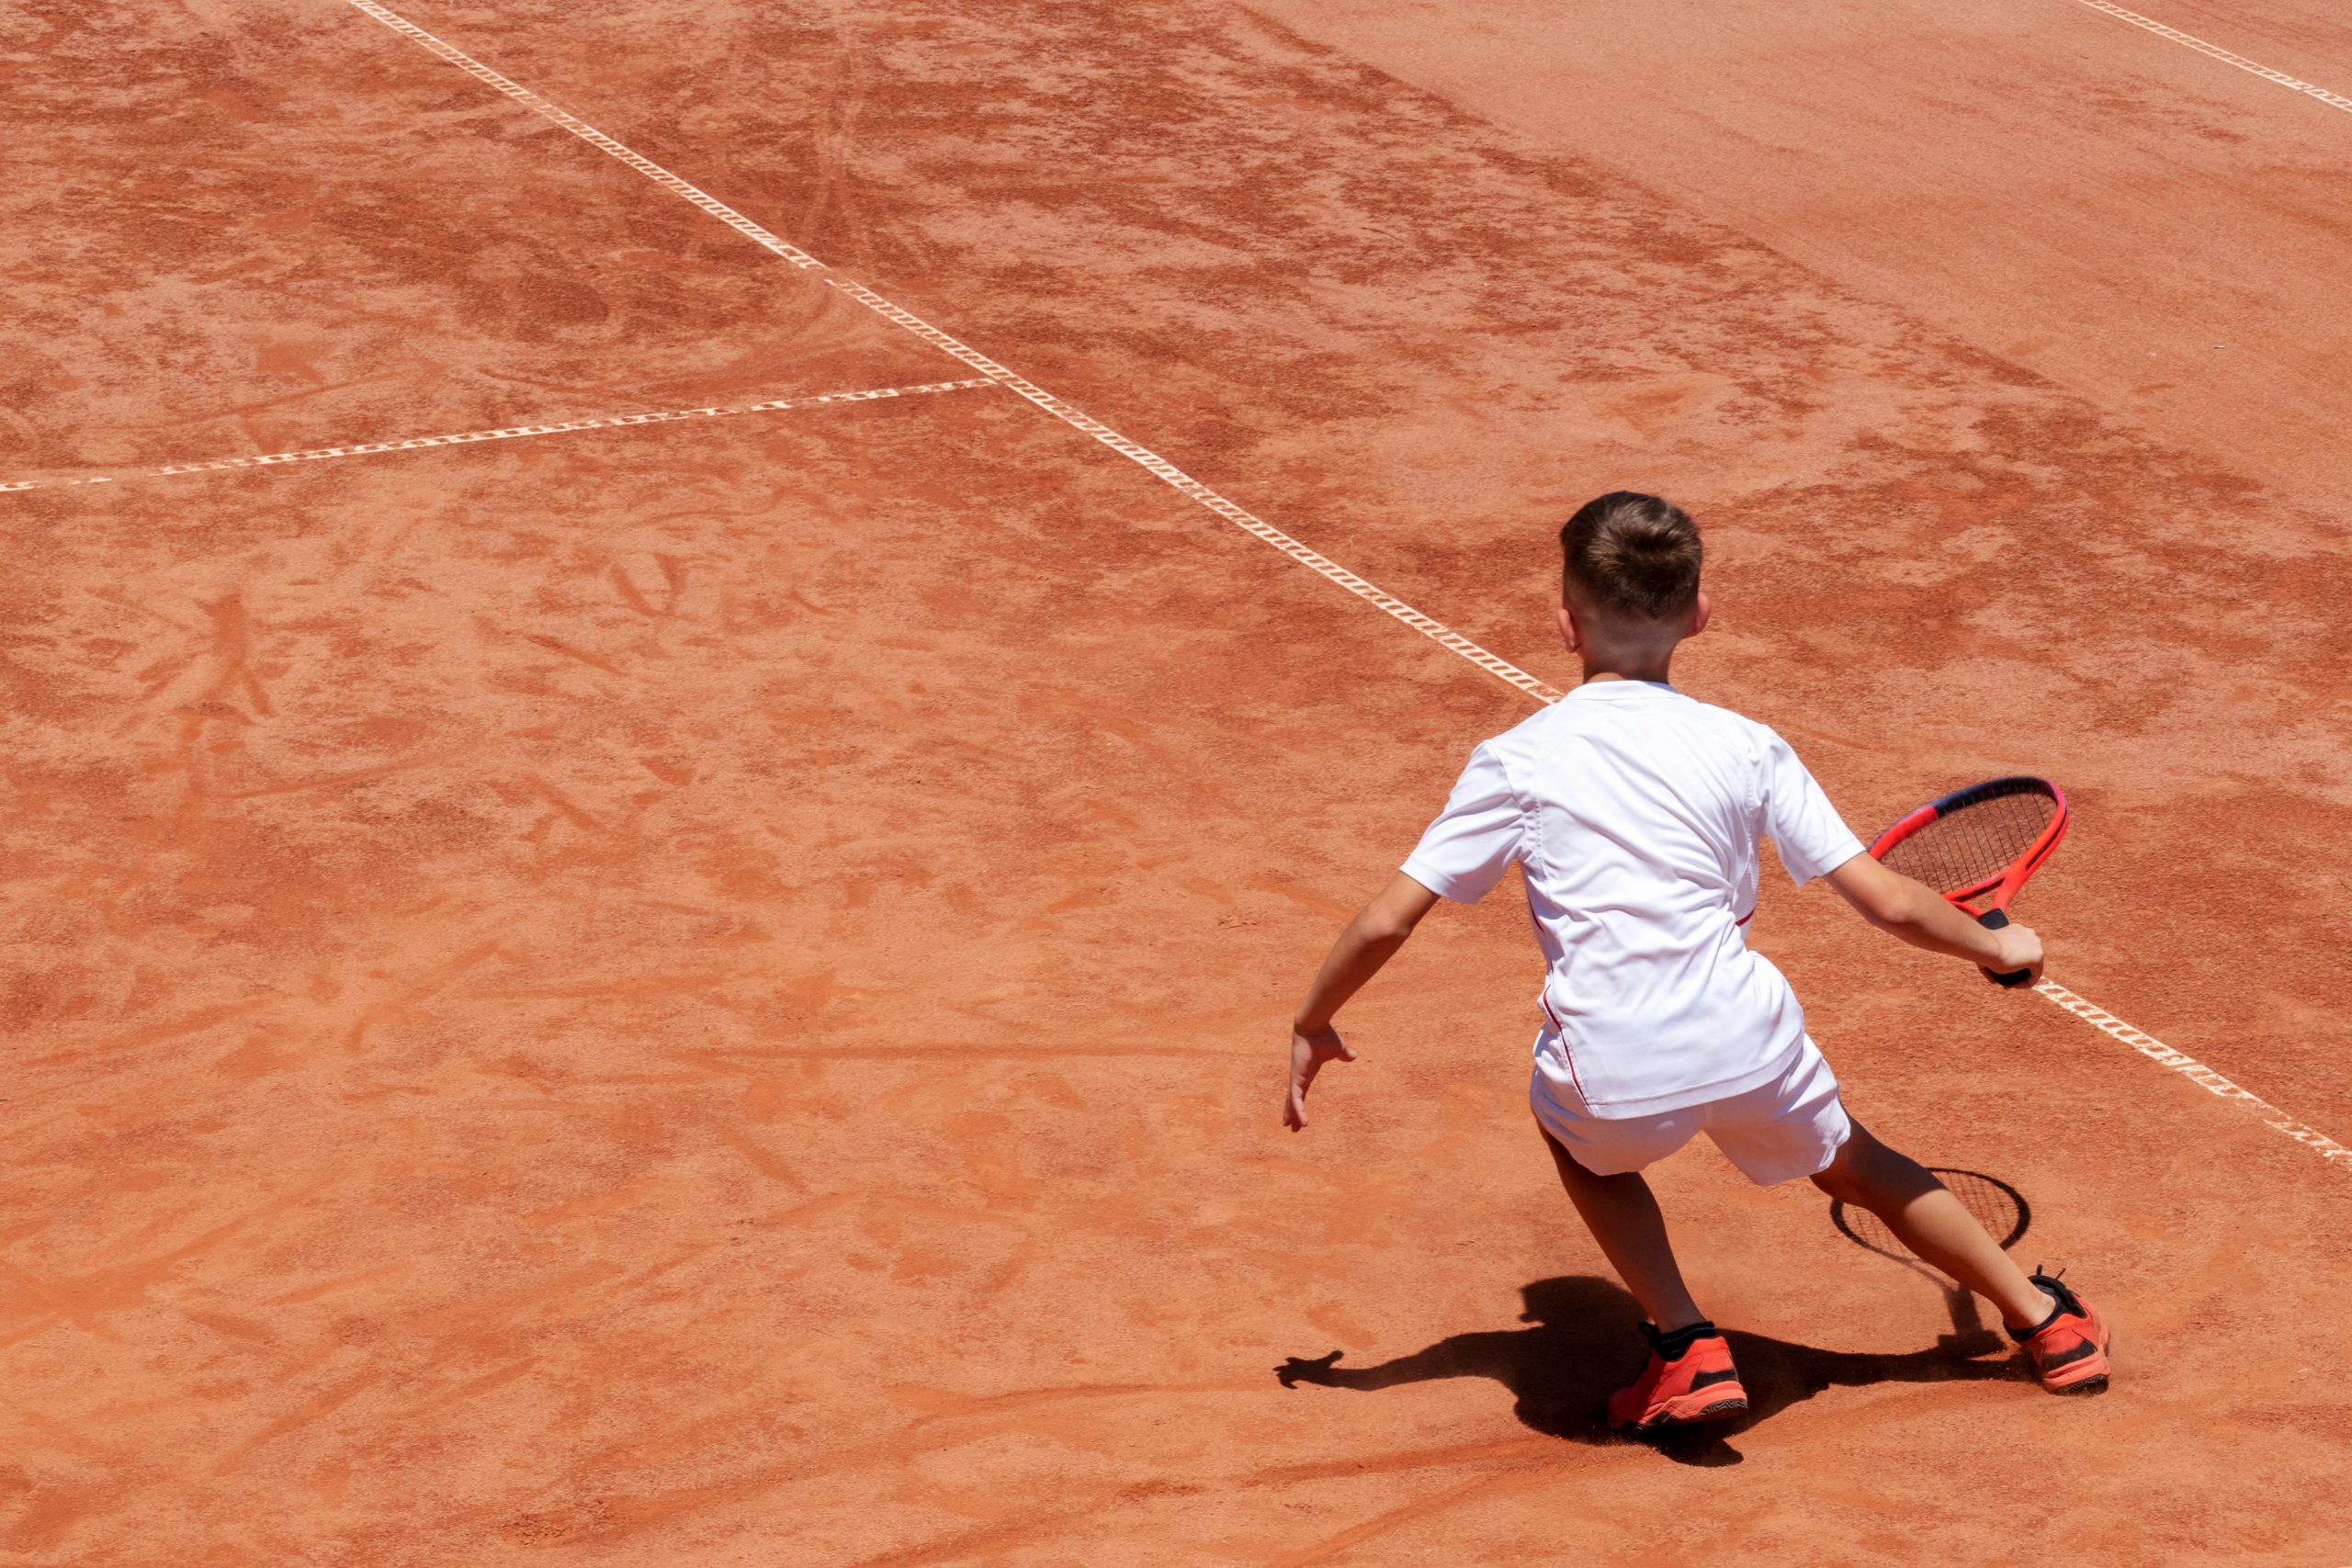 Young male tennis player with racket in action. Boy plays tennis on a clay tennis court. Child is concentrated and focused on the game. Kids tennis sport background with shadow. Motion. Copy space